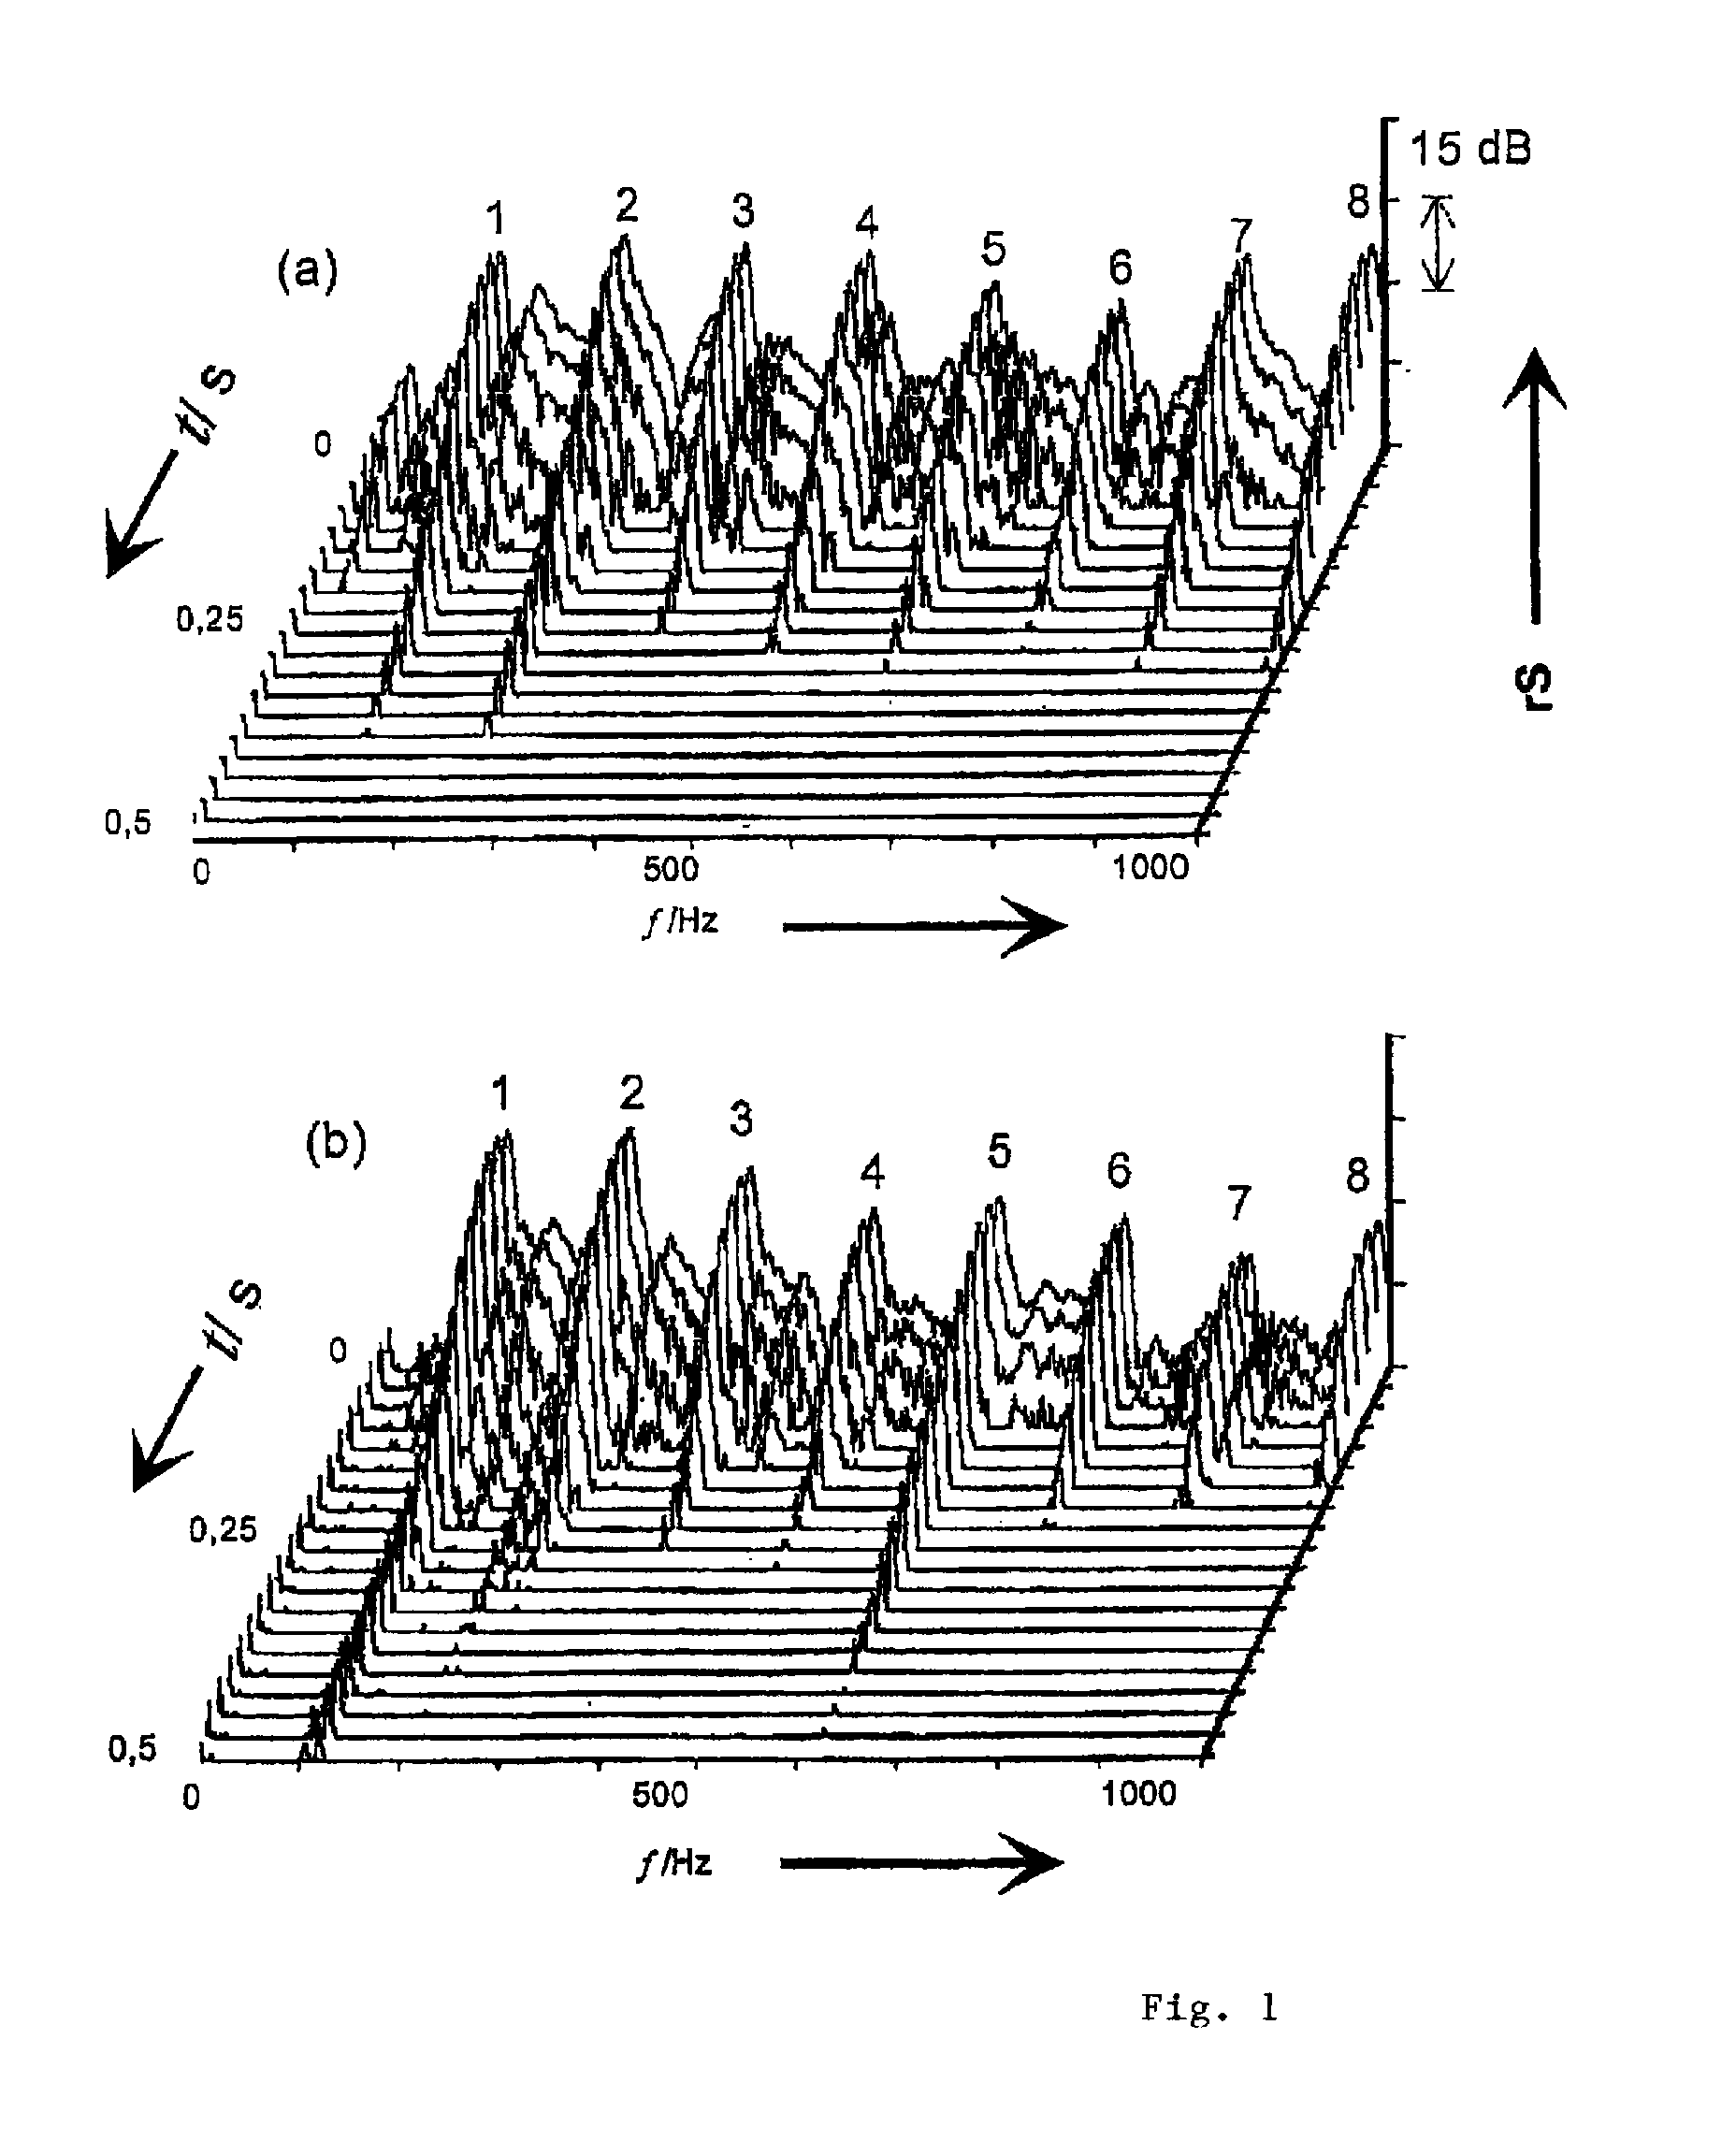 Pianoforte instrument exhibiting an additional delivery of energy into the sound board, and method for influencing the sound of a pianoforte instrument